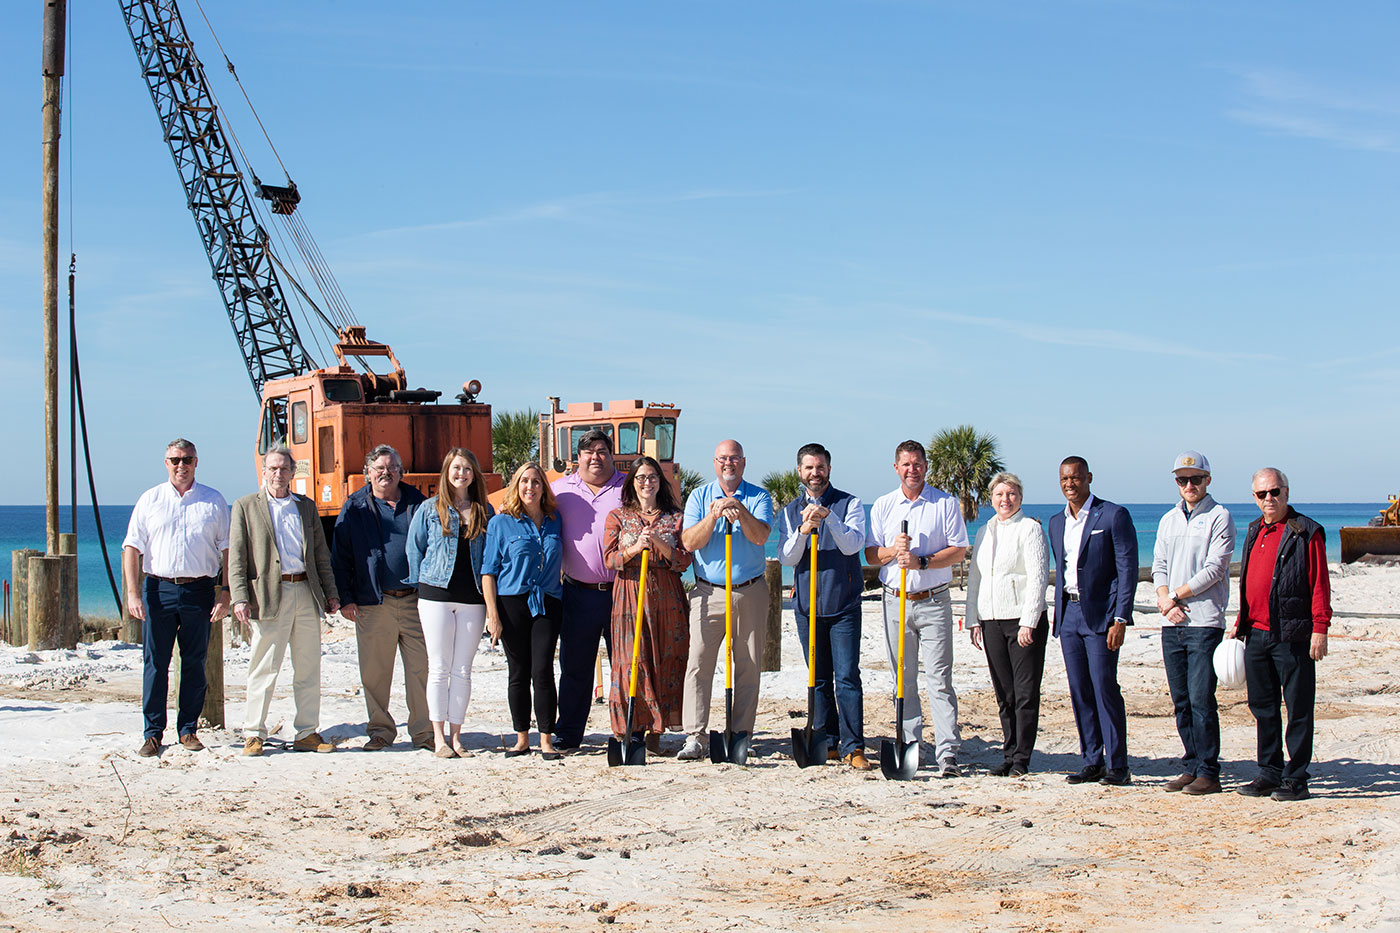 Margaritaville Beach Cottage Resort Groundbreaking group photo with gulf in the background